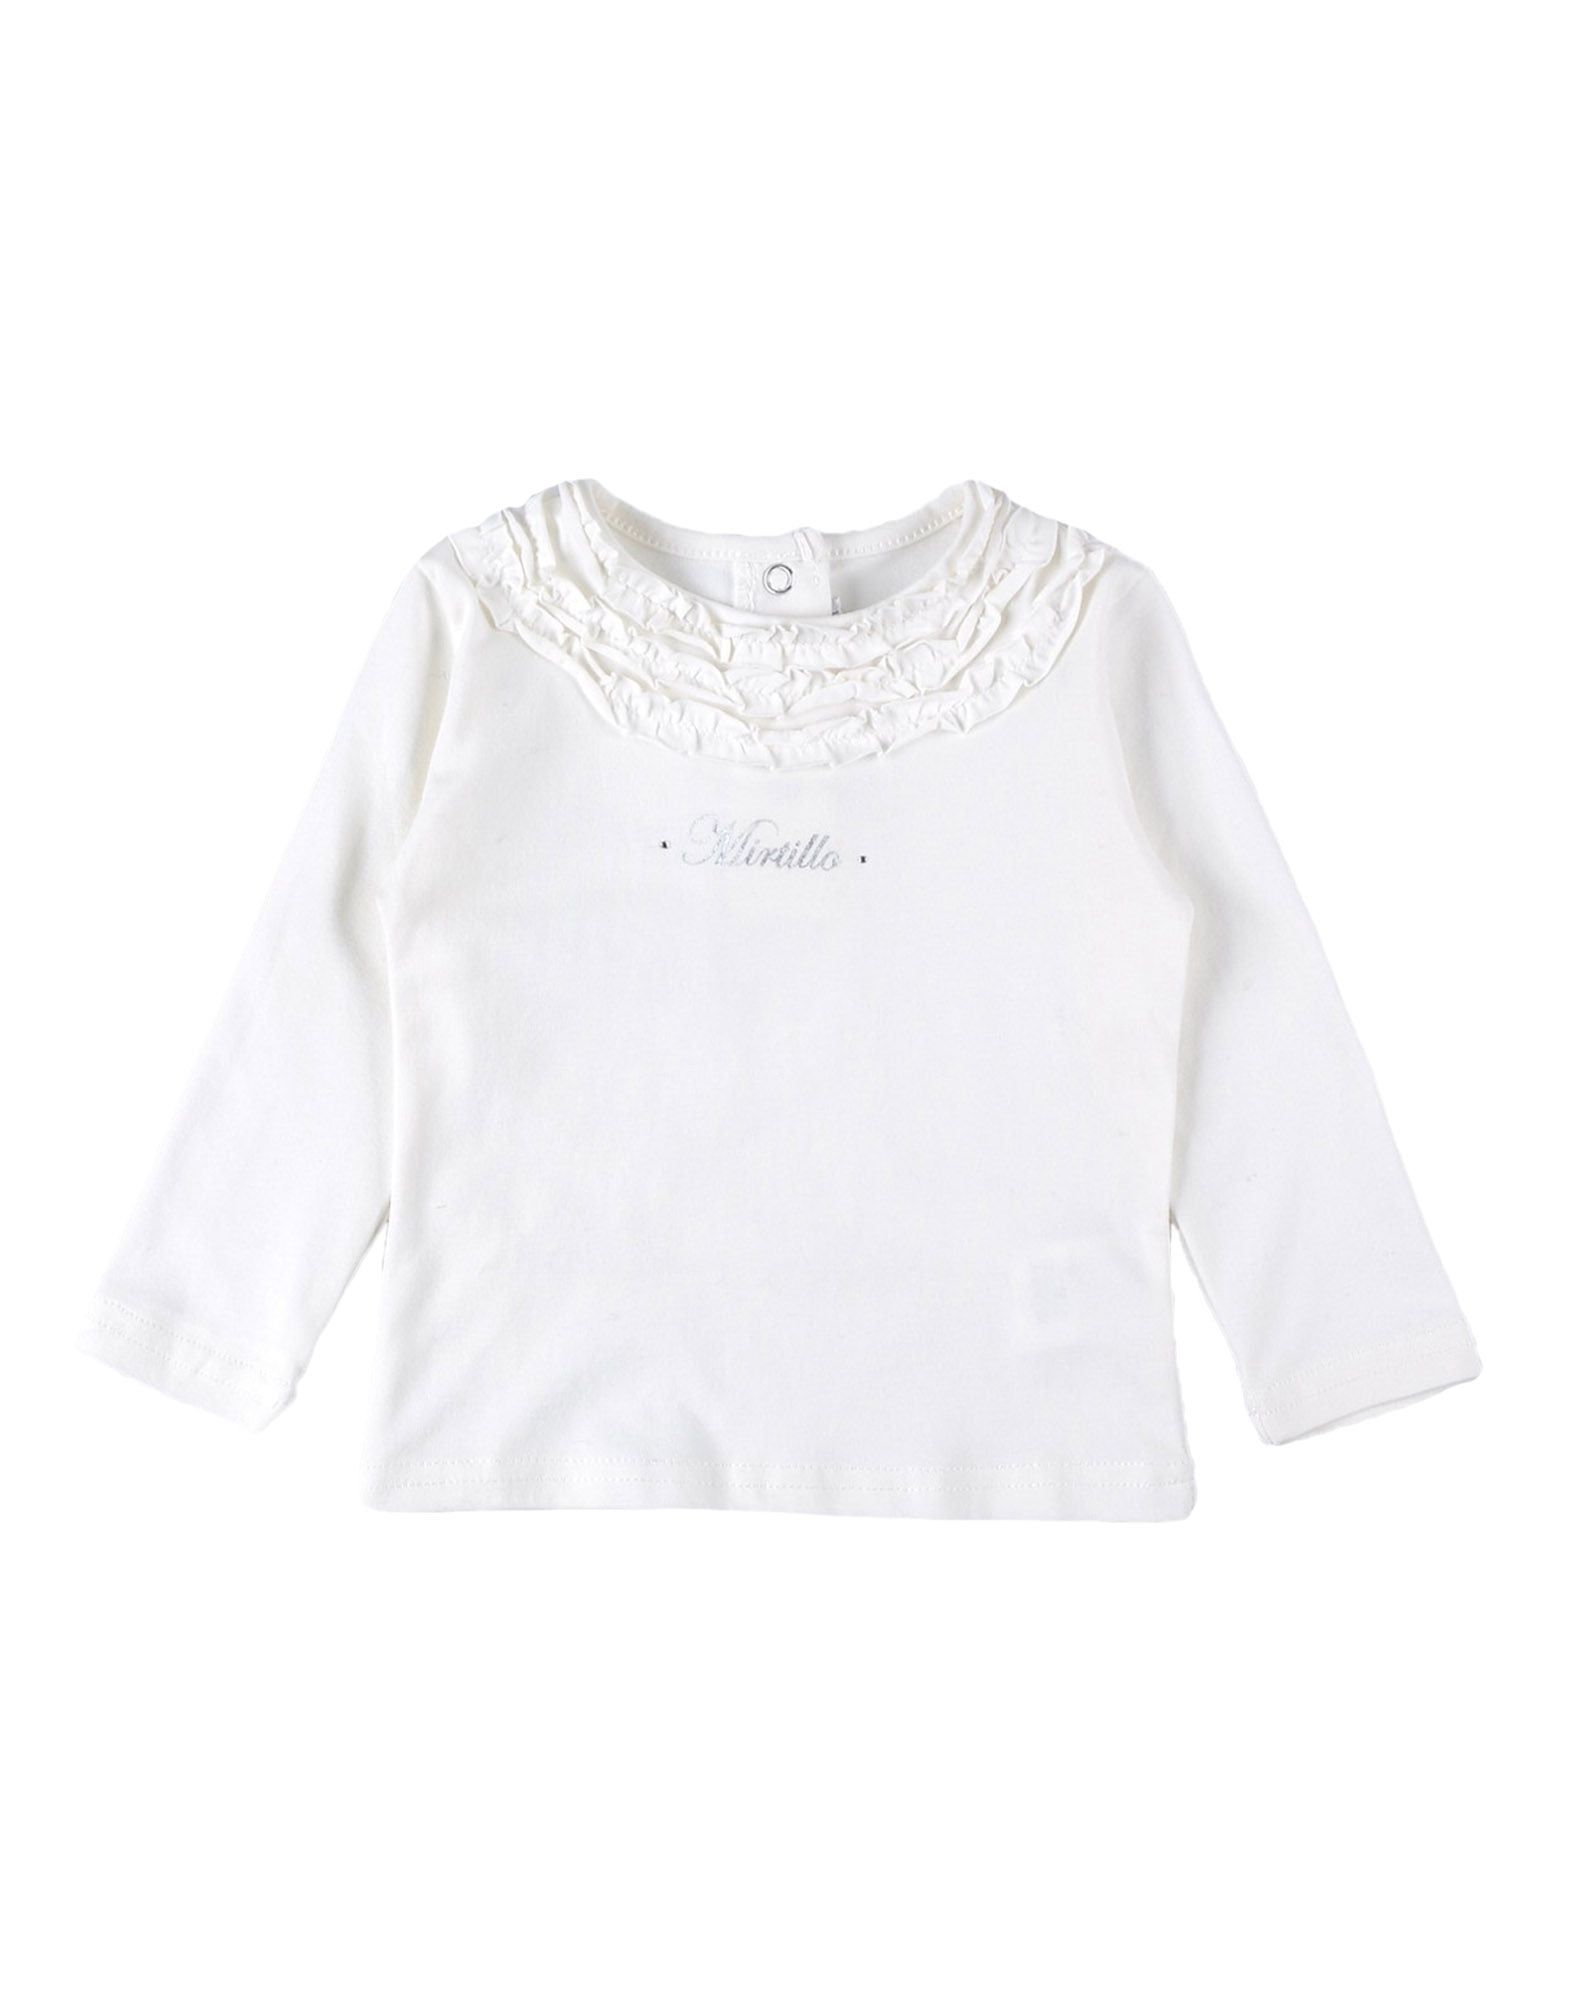 
  Long-sleeved T-shirt of the Mirtillo girl's clothing line, buttoned up on the
  behind and wit...